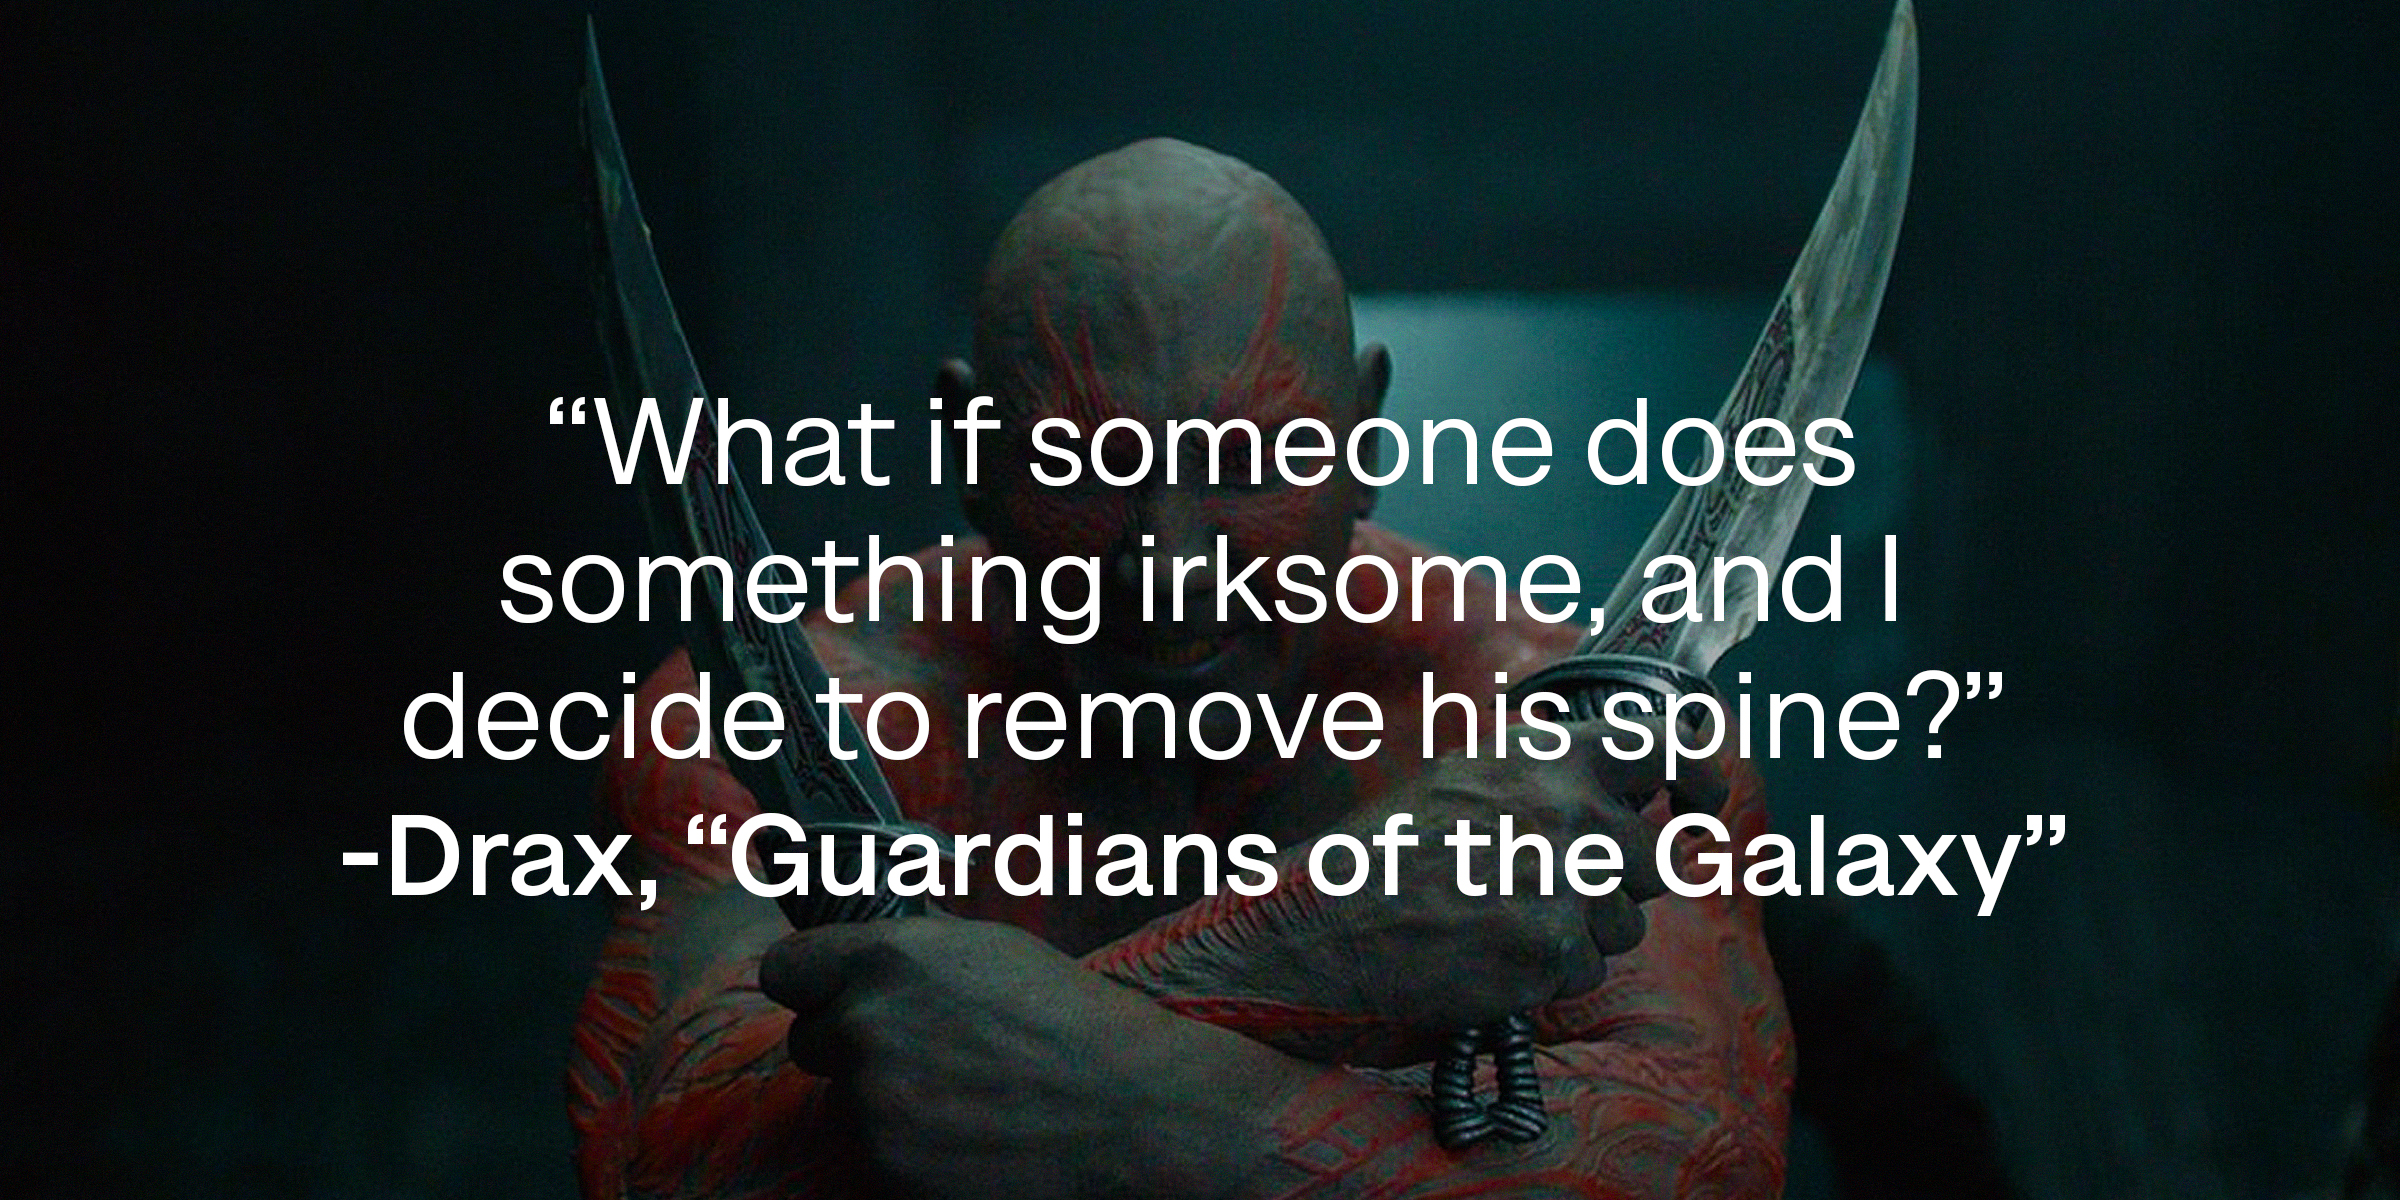 Drax with his quote from "Guardians of the Galaxy:" "What if someone does something irksome, and I decide to remove his spine?" | Source: Facebook.com/guardiansofthegalaxy